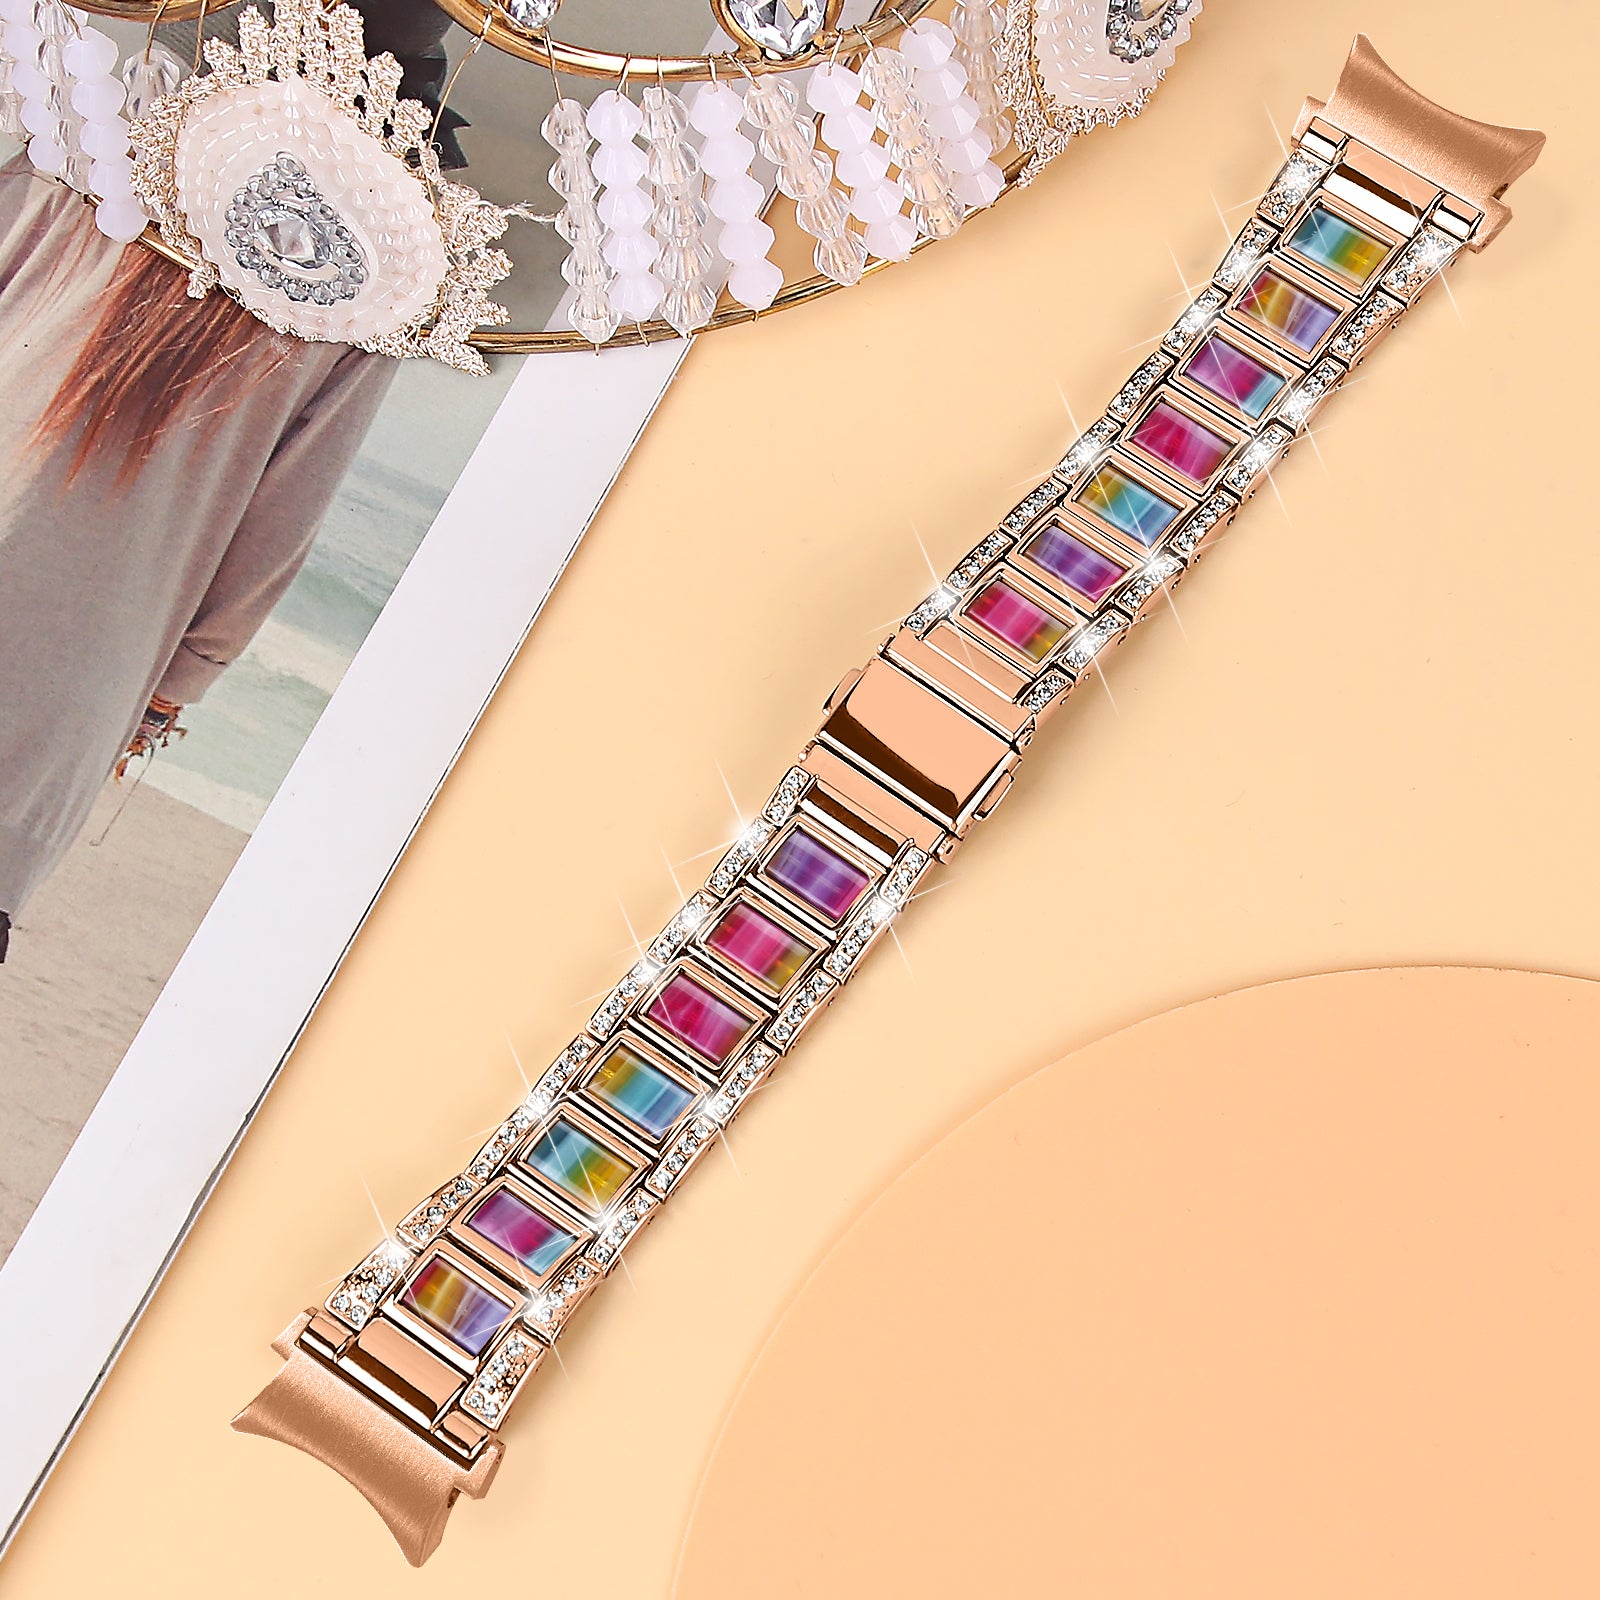 for Samsung Galaxy Watch4 Active 40mm/44mm/Watch4 Classic 42mm/46mm Rhinestone Decor Stainless Steel Resin Watch Band with Watch Strap Adapter - Rose Gold/Purple Green Mix